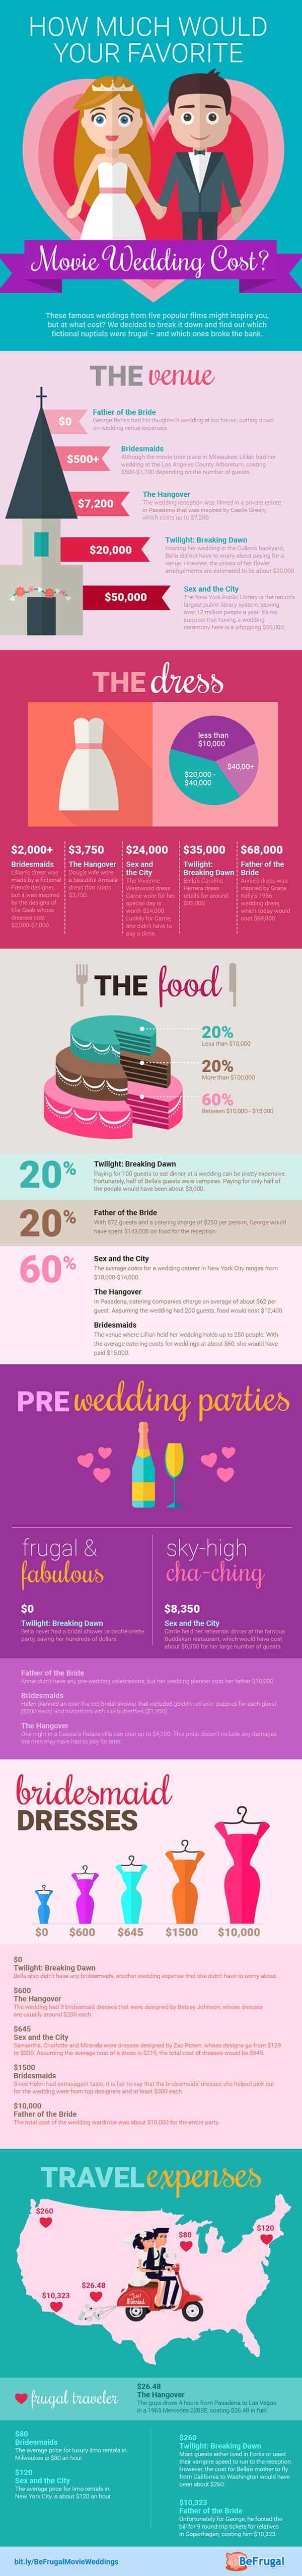 Wedding costs in the movies.